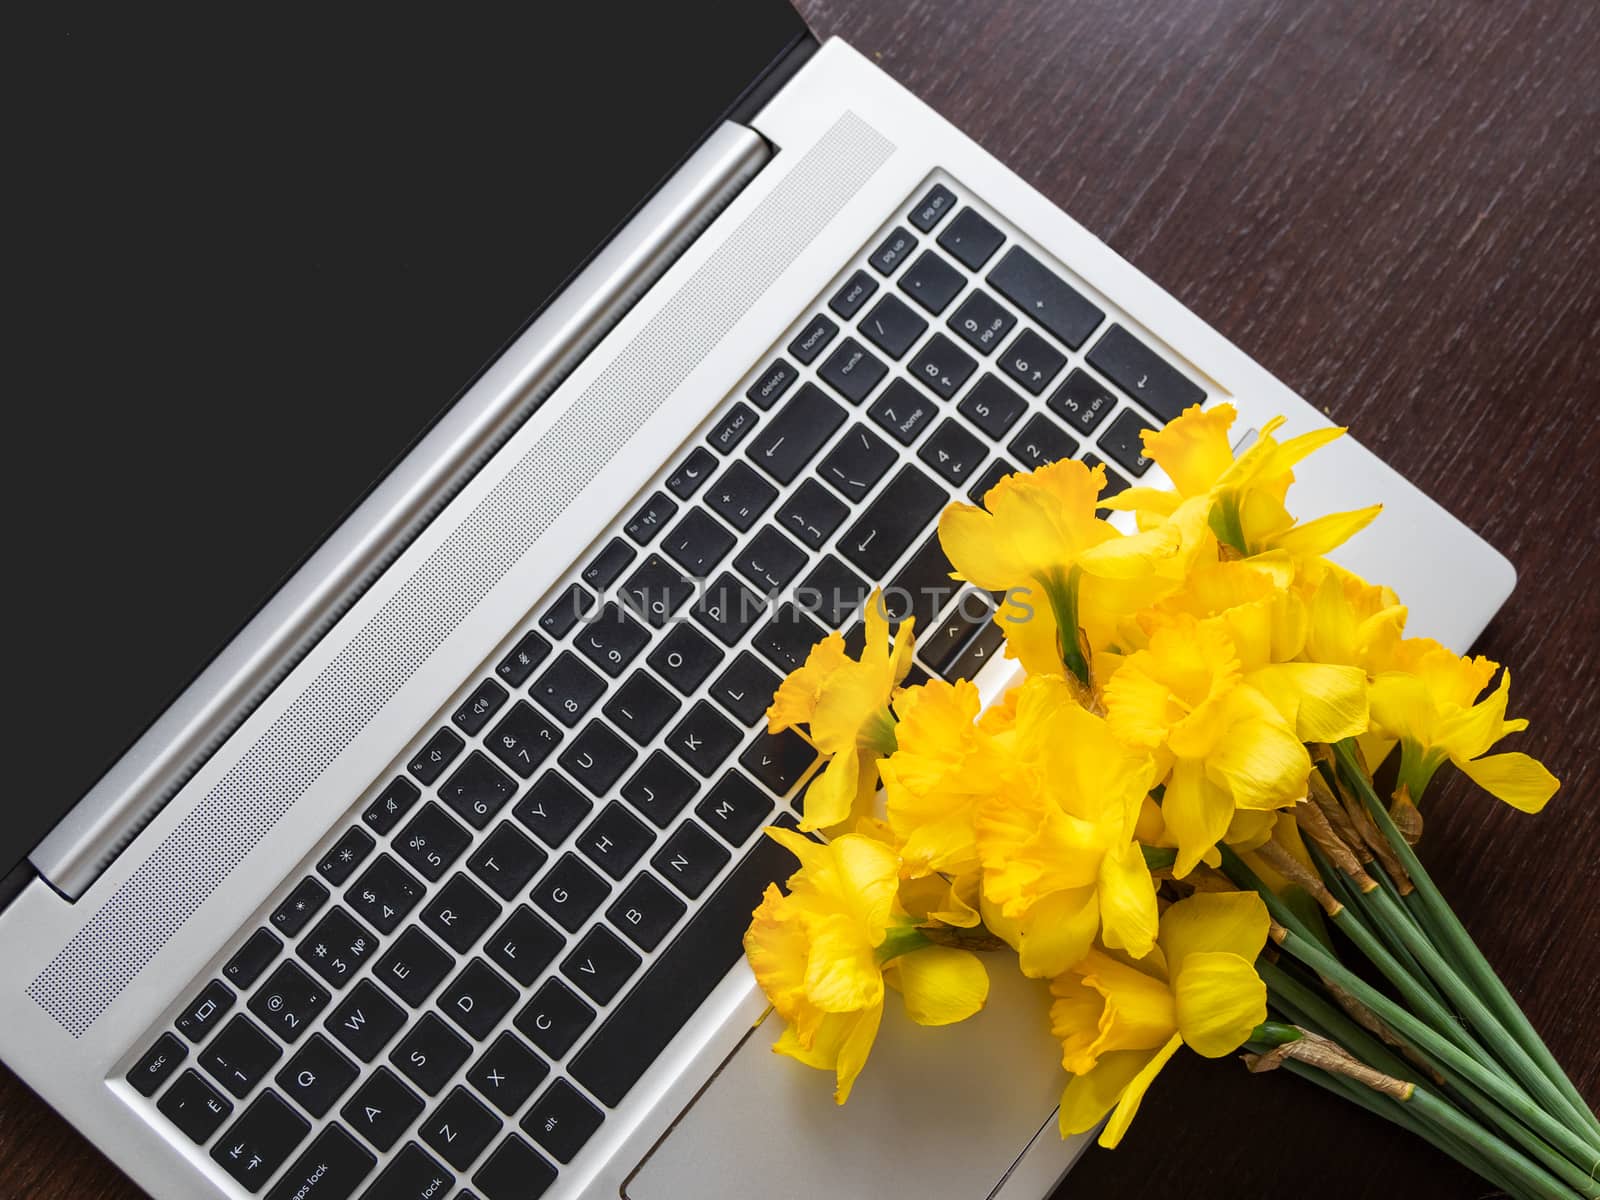 Bouquet of Narcissus or daffodils lying on silver metal laptop. Bright yellow flowers on portable device. Wooden background.